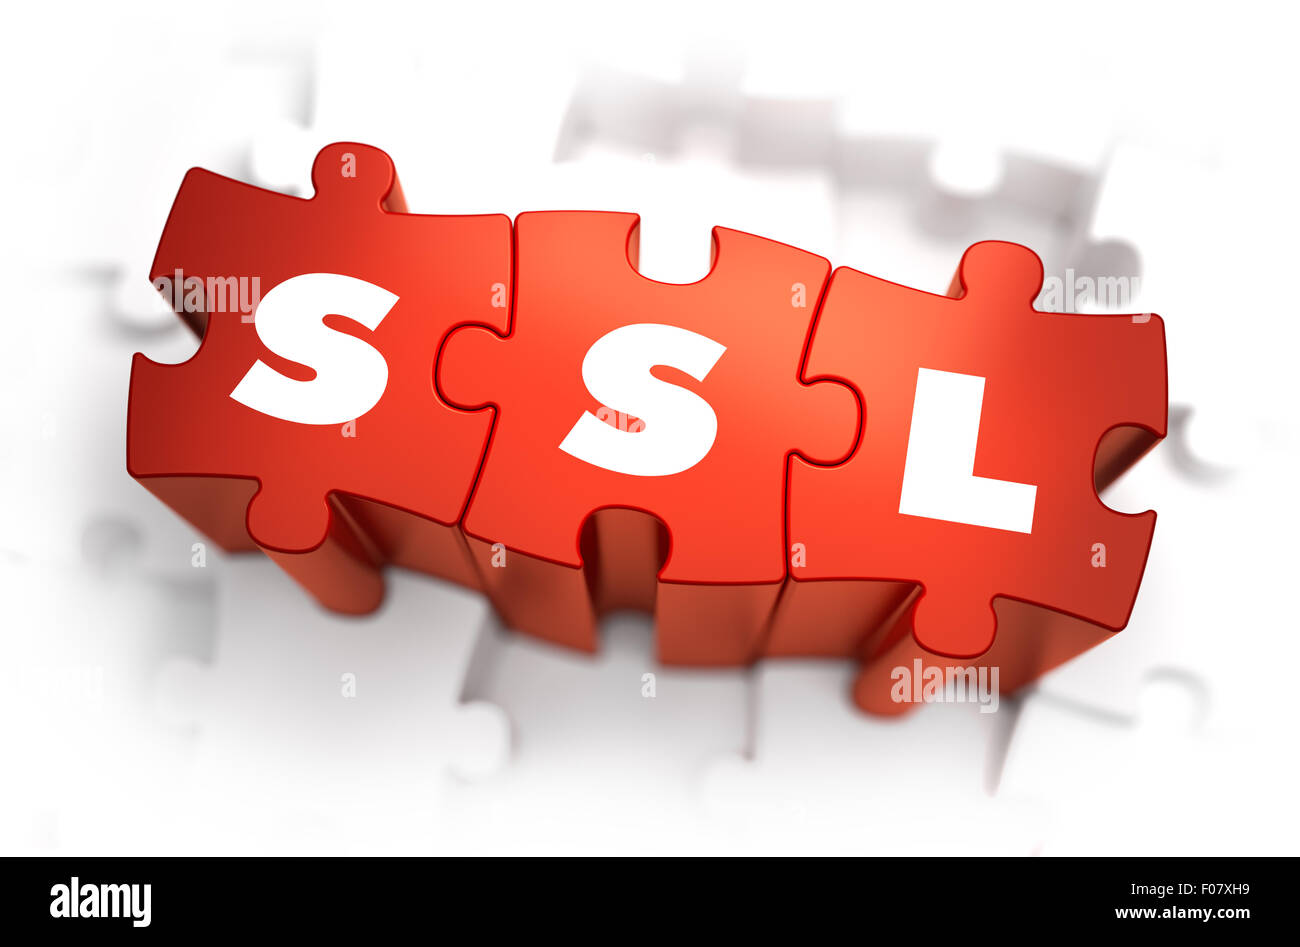 SSL - Text on Red Puzzles. Stock Photo